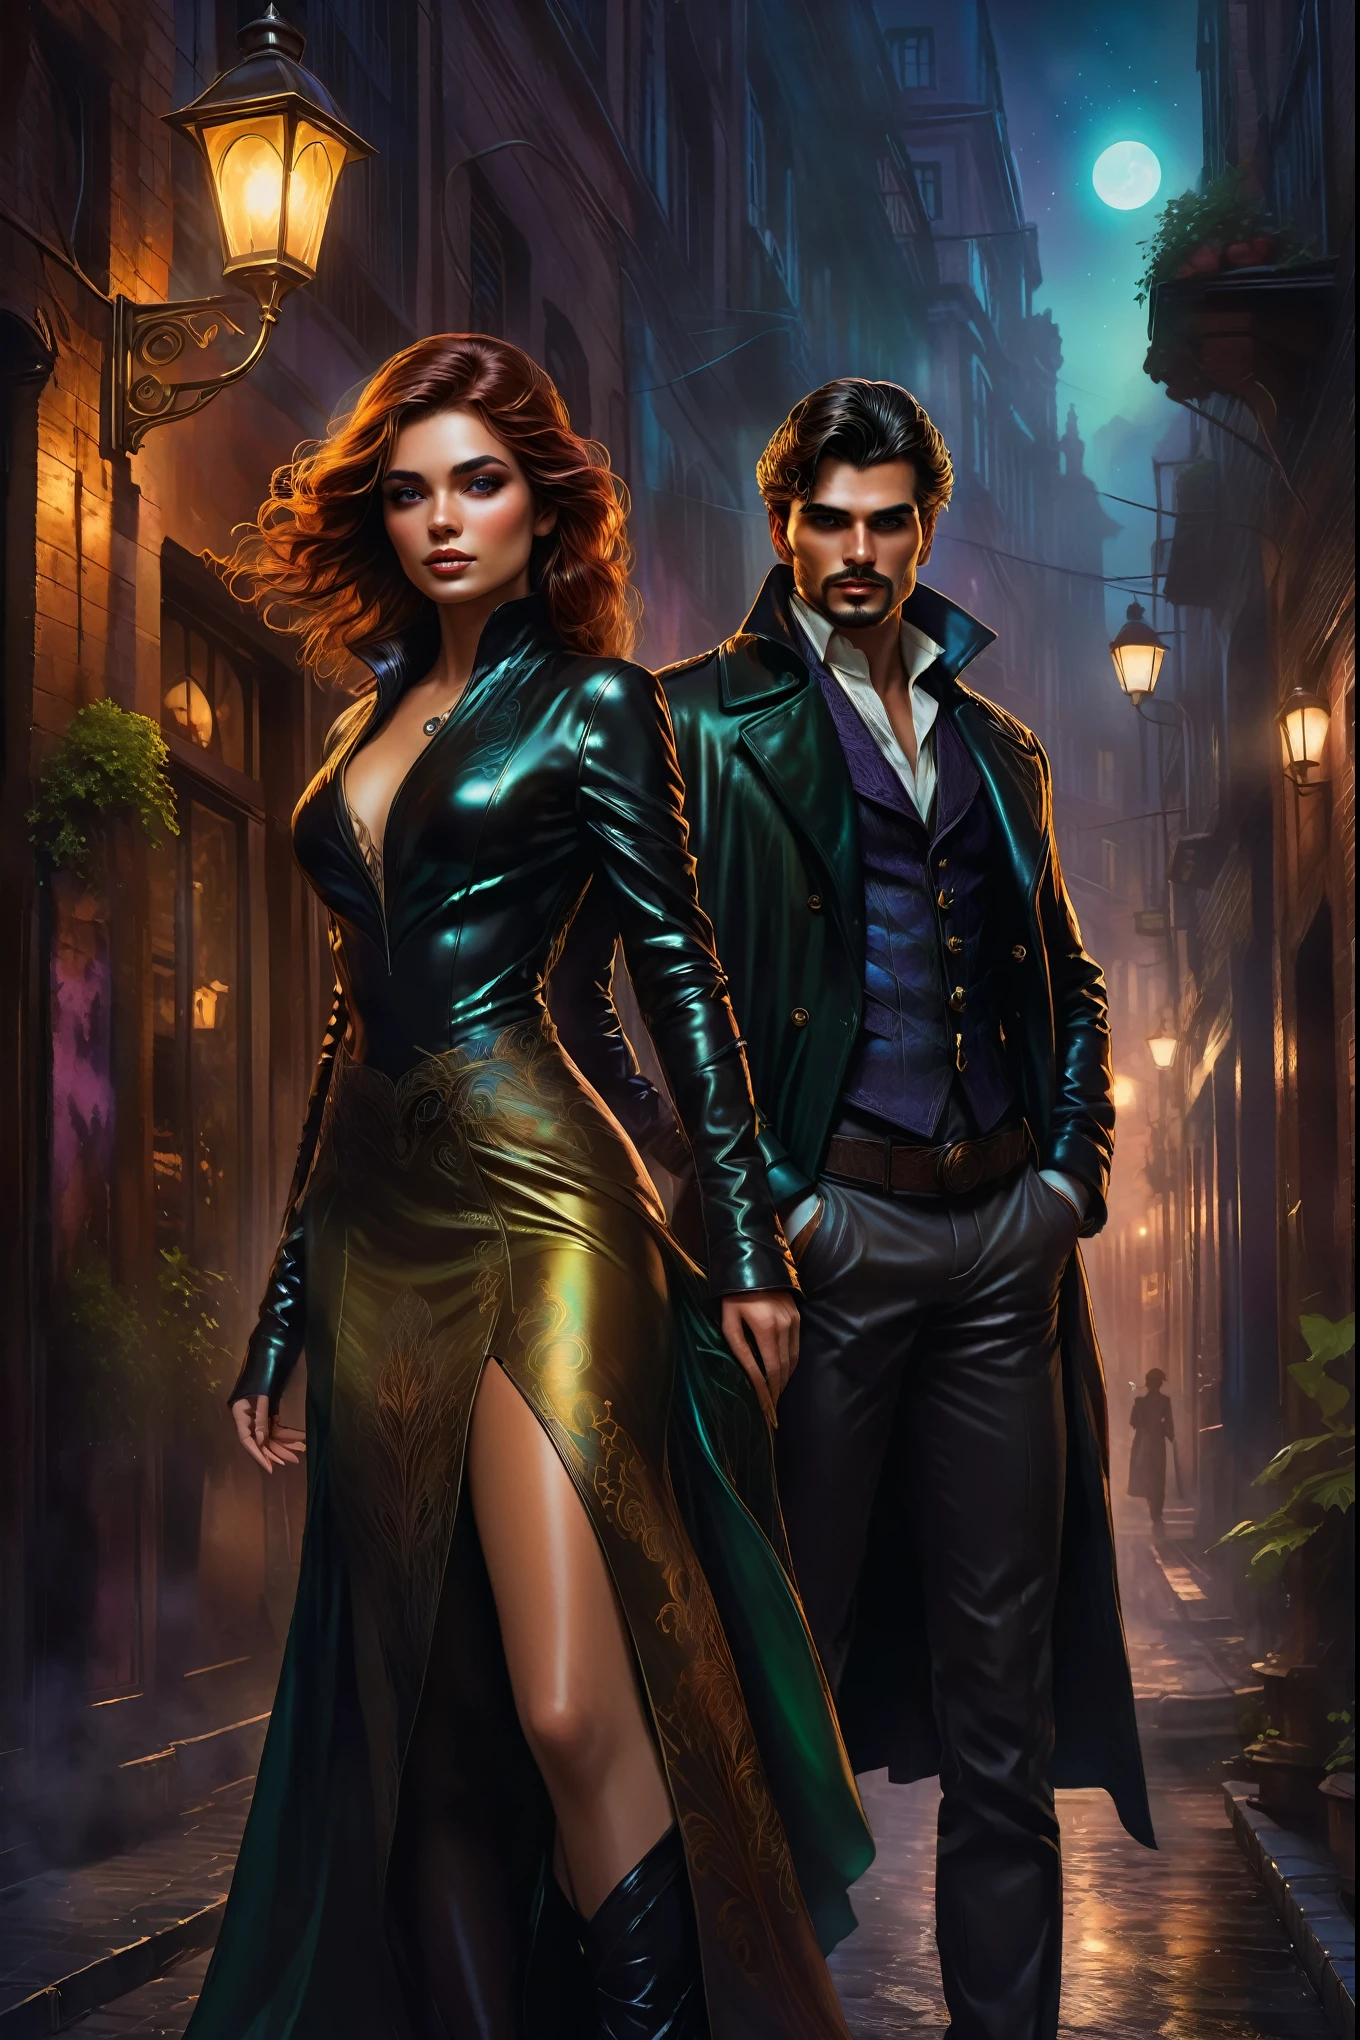 woman dressed in english leather gown, arafed image of a couple of people standing in a street, artgerm and j. dickenson, edmund blair and charlie bowater, charlie bowater and mark brooks, artgerm and genzoman, darius zawadzki and tom bagshaw, romance novel mystic detective cover, stylized urban fantasy artwork, PERFECT ANATOMY, beautifl detailed hand fingers, double exposition, ultra glossing silk hair, empty street, mystic atmosphere, fog, complementary colorscheme, complementary colors, contour ulraglow light